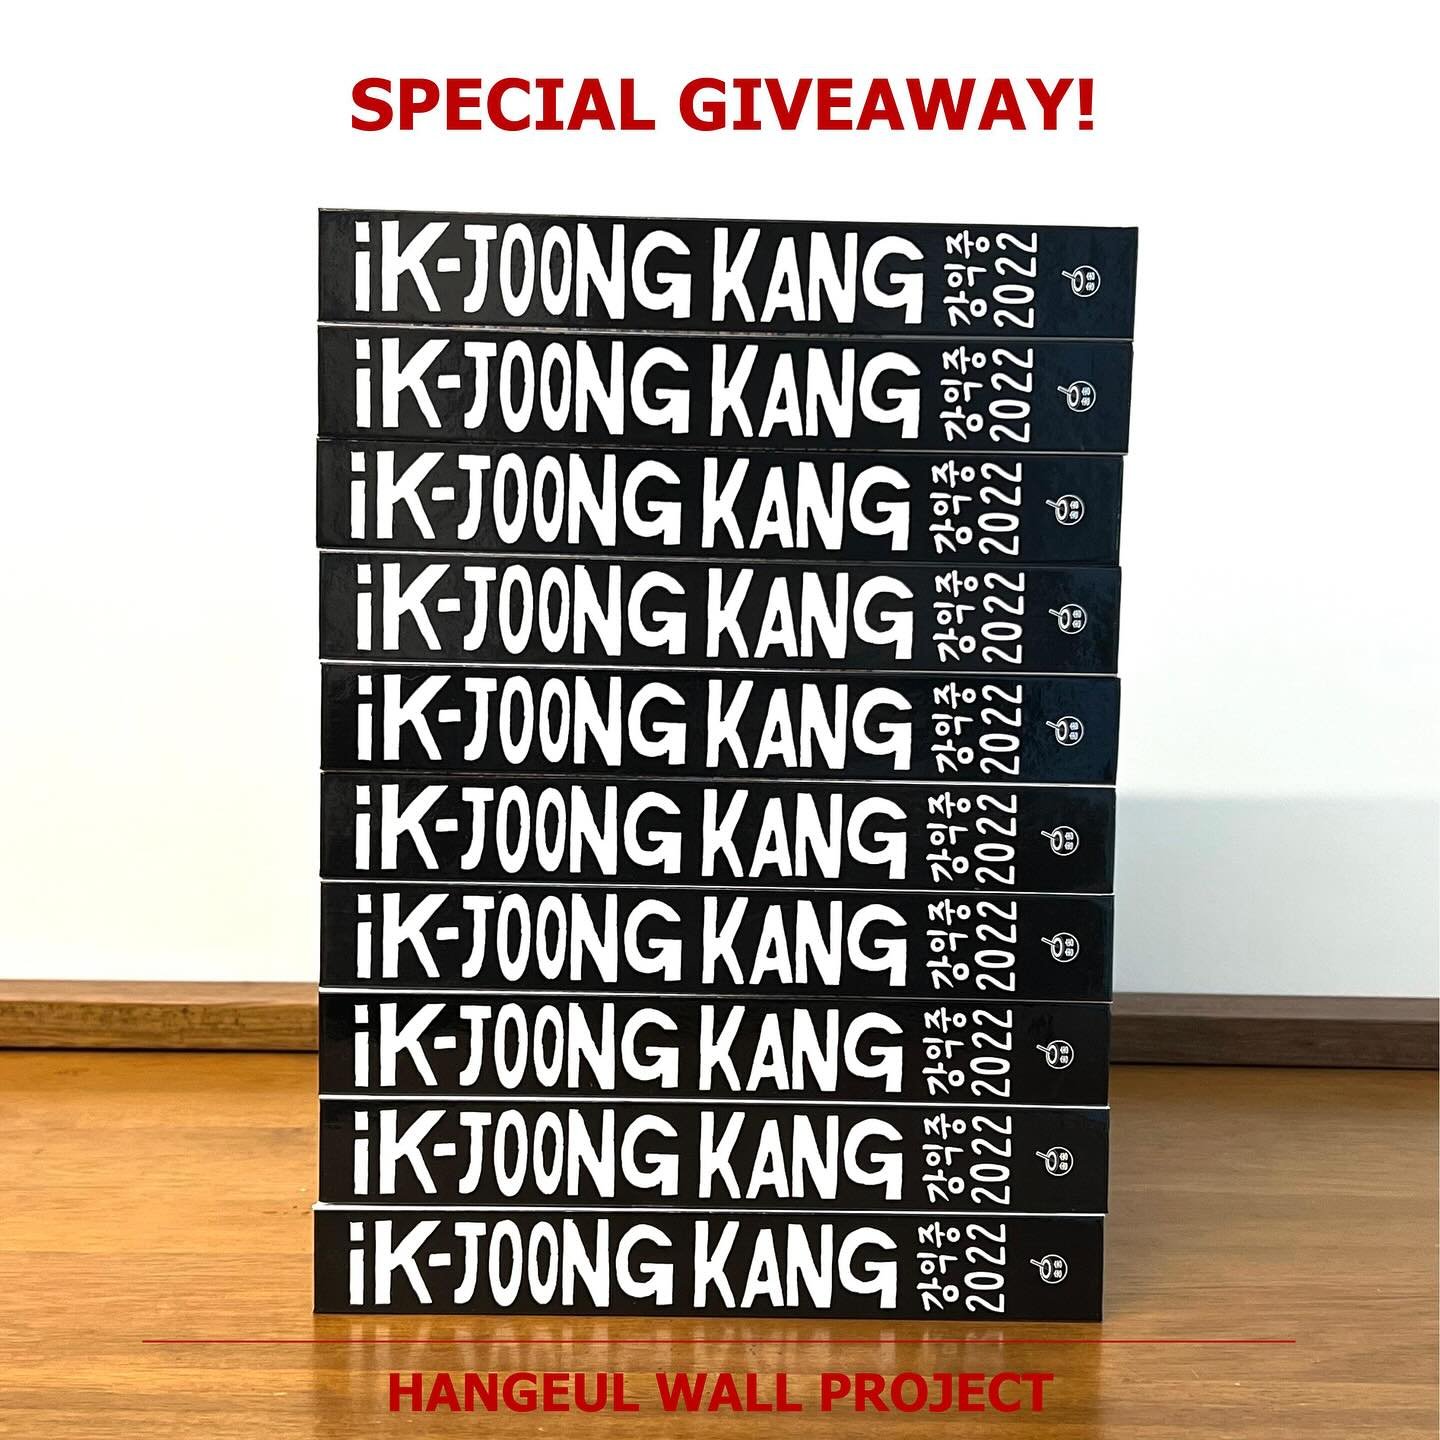 [📣 Special Giveaway] 

To celebrate the ongoing Hangeul Wall Project and reaching 10,000+ friends in our community, we&rsquo;re excited to announce a special giveaway for 10 lucky participants! Winners will receive an exclusive signed catalogue by I